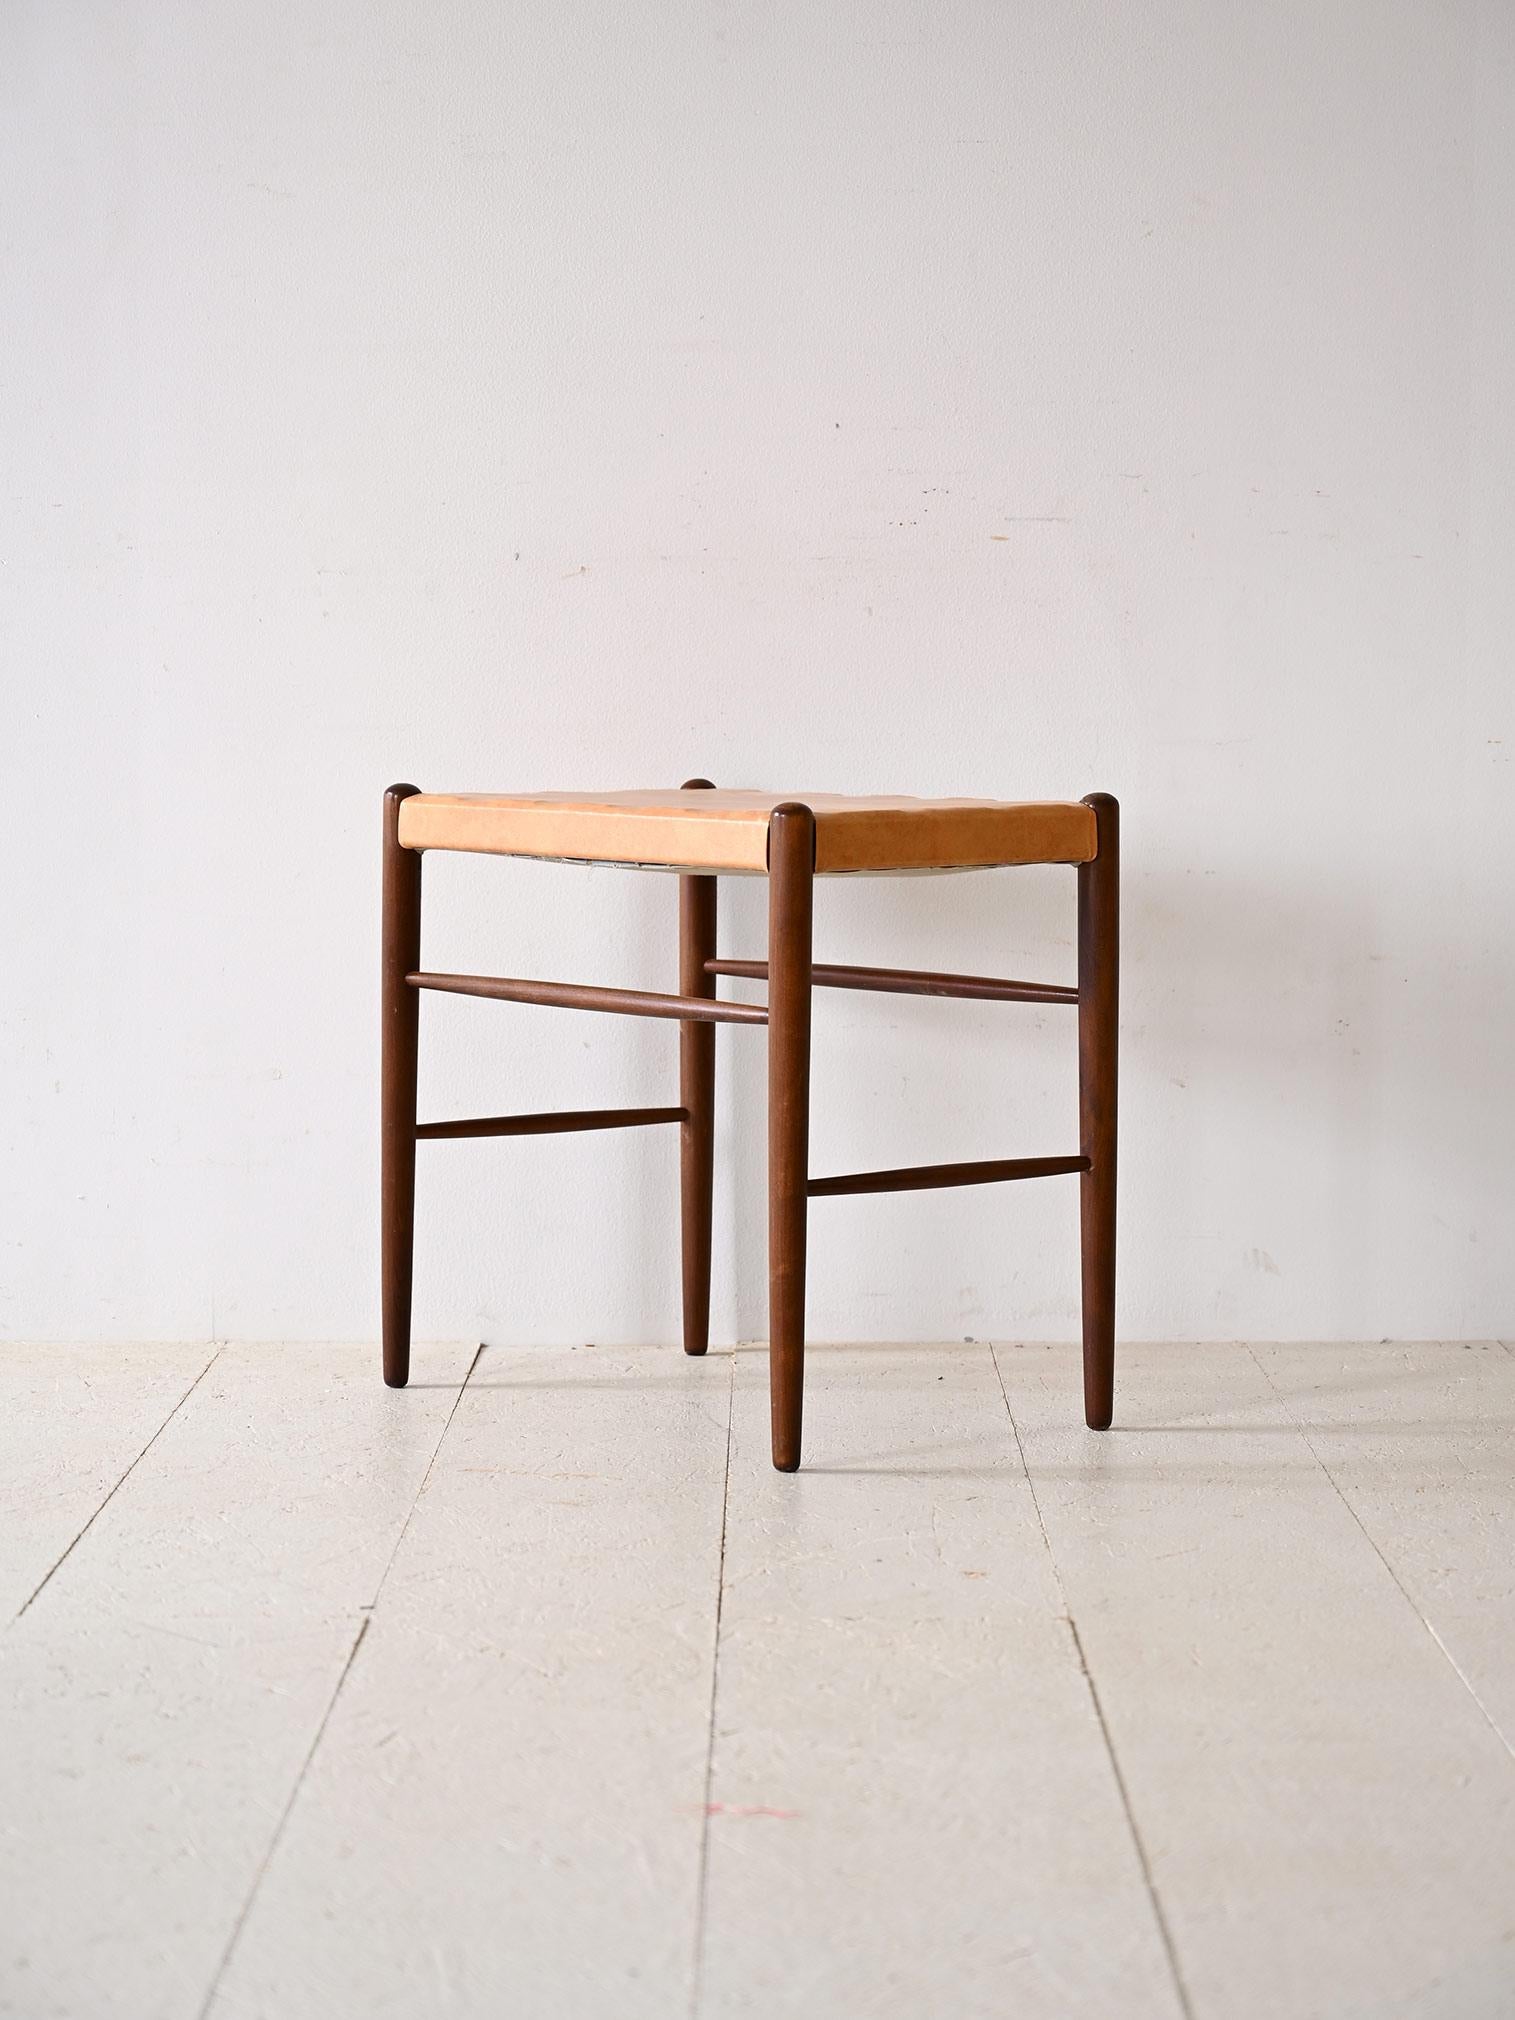 Original Scandinavian stool from the 1960s.

A piece of furniture with a classic flavor, consisting of a wooden frame formed by long conical legs and a beige leatherette seat.
It can be used in different rooms of the house to give a retro and